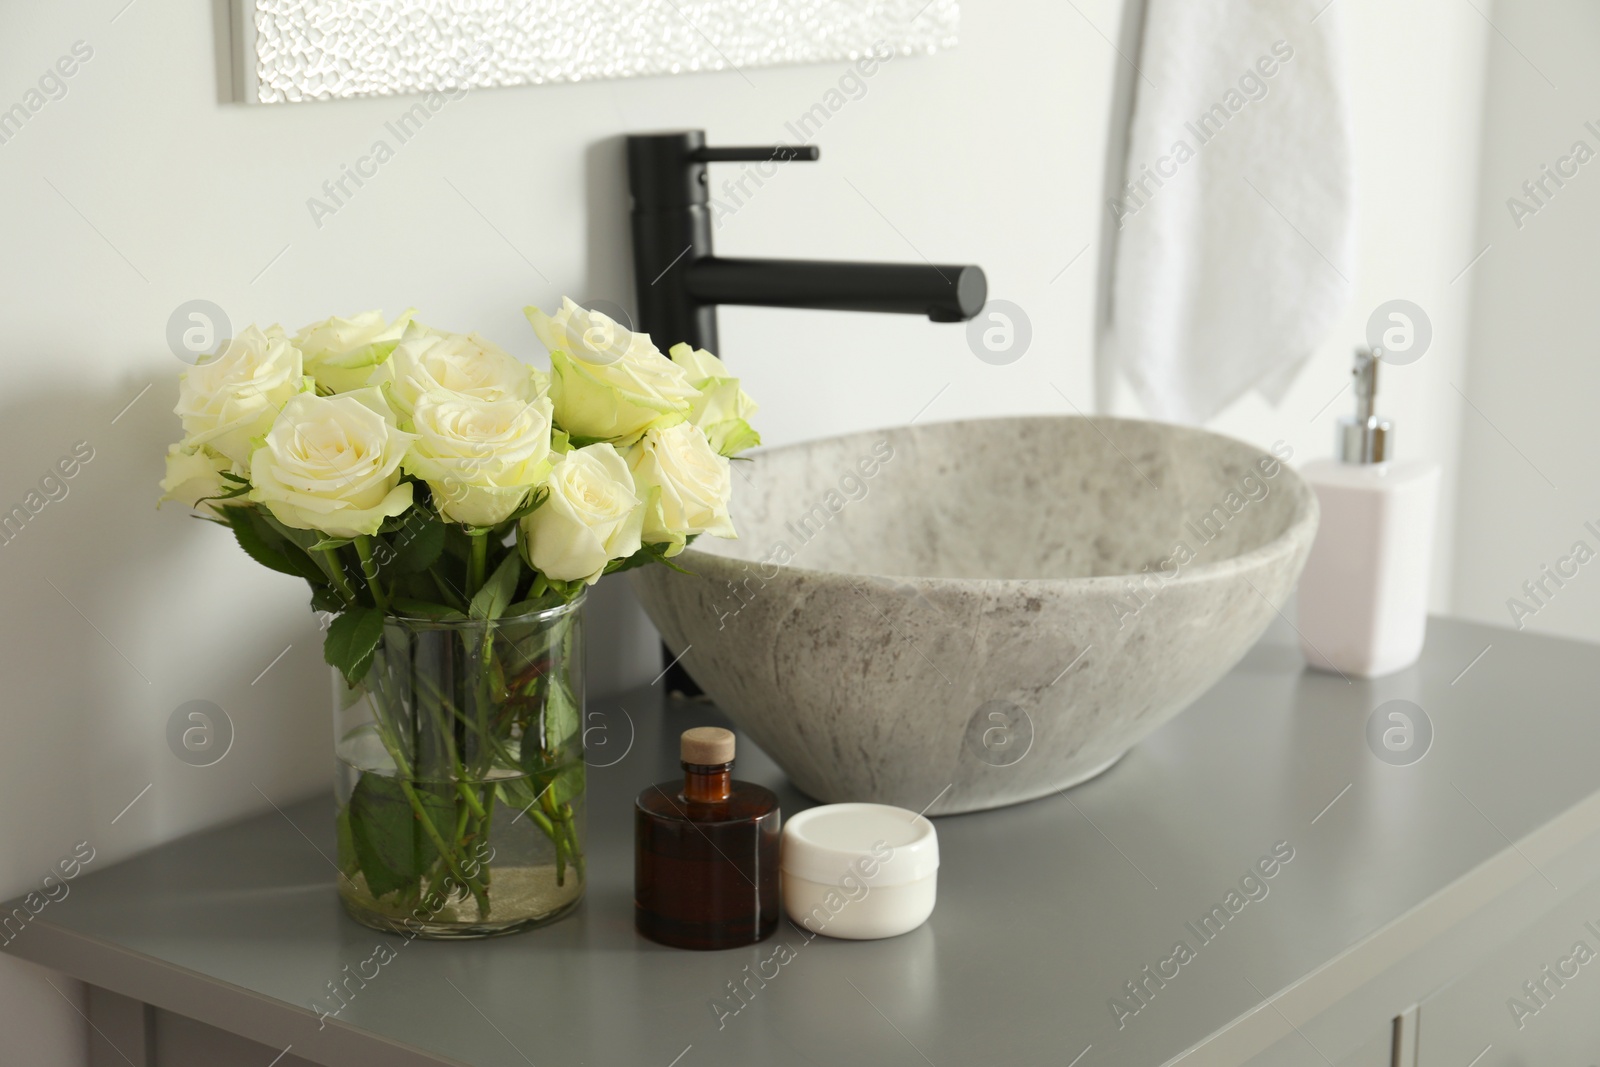 Photo of Vase with beautiful white roses and toiletries near sink in bathroom